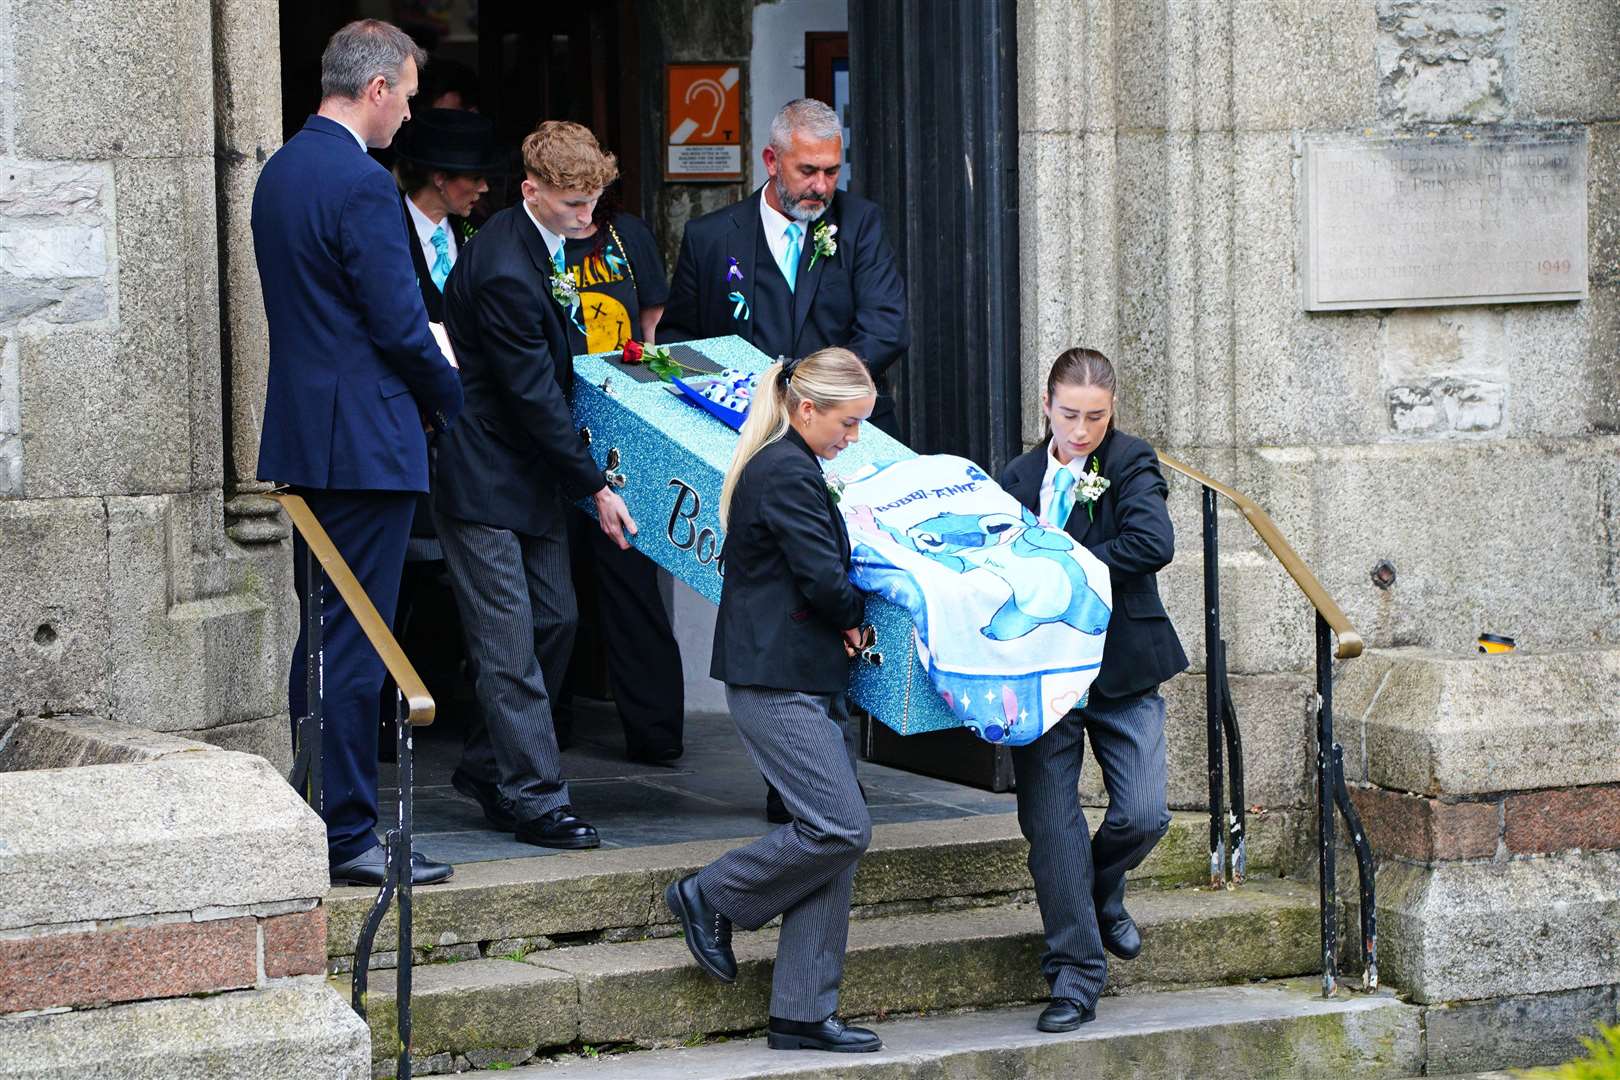 Bobbi-Anne McLeod’s coffin is carried out of the church after her funeral (Ben Birchall/PA)